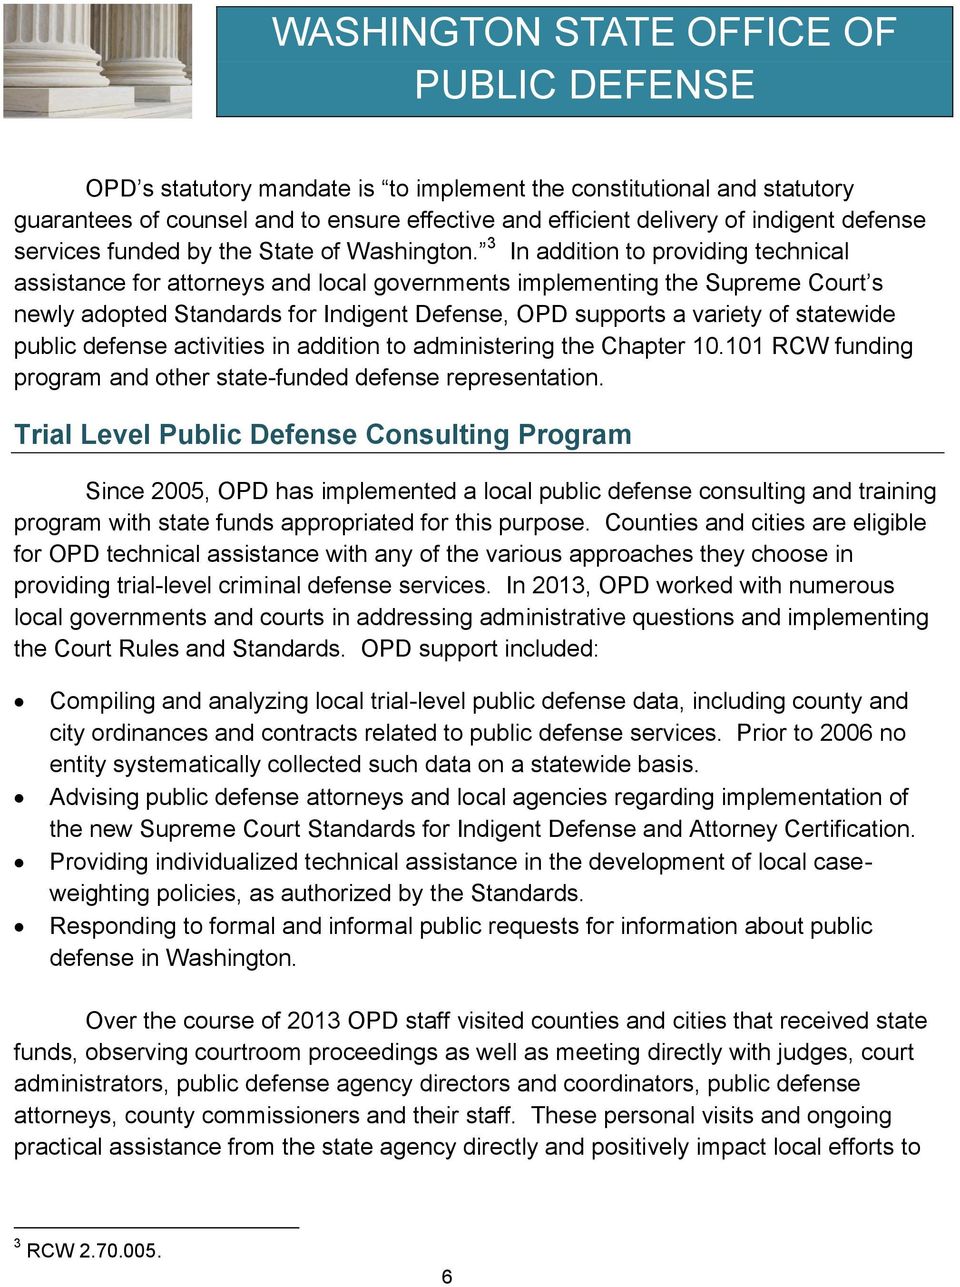 3 In addition to providing technical assistance for attorneys and local governments implementing the Supreme Court s newly adopted Standards for Indigent Defense, OPD supports a variety of statewide